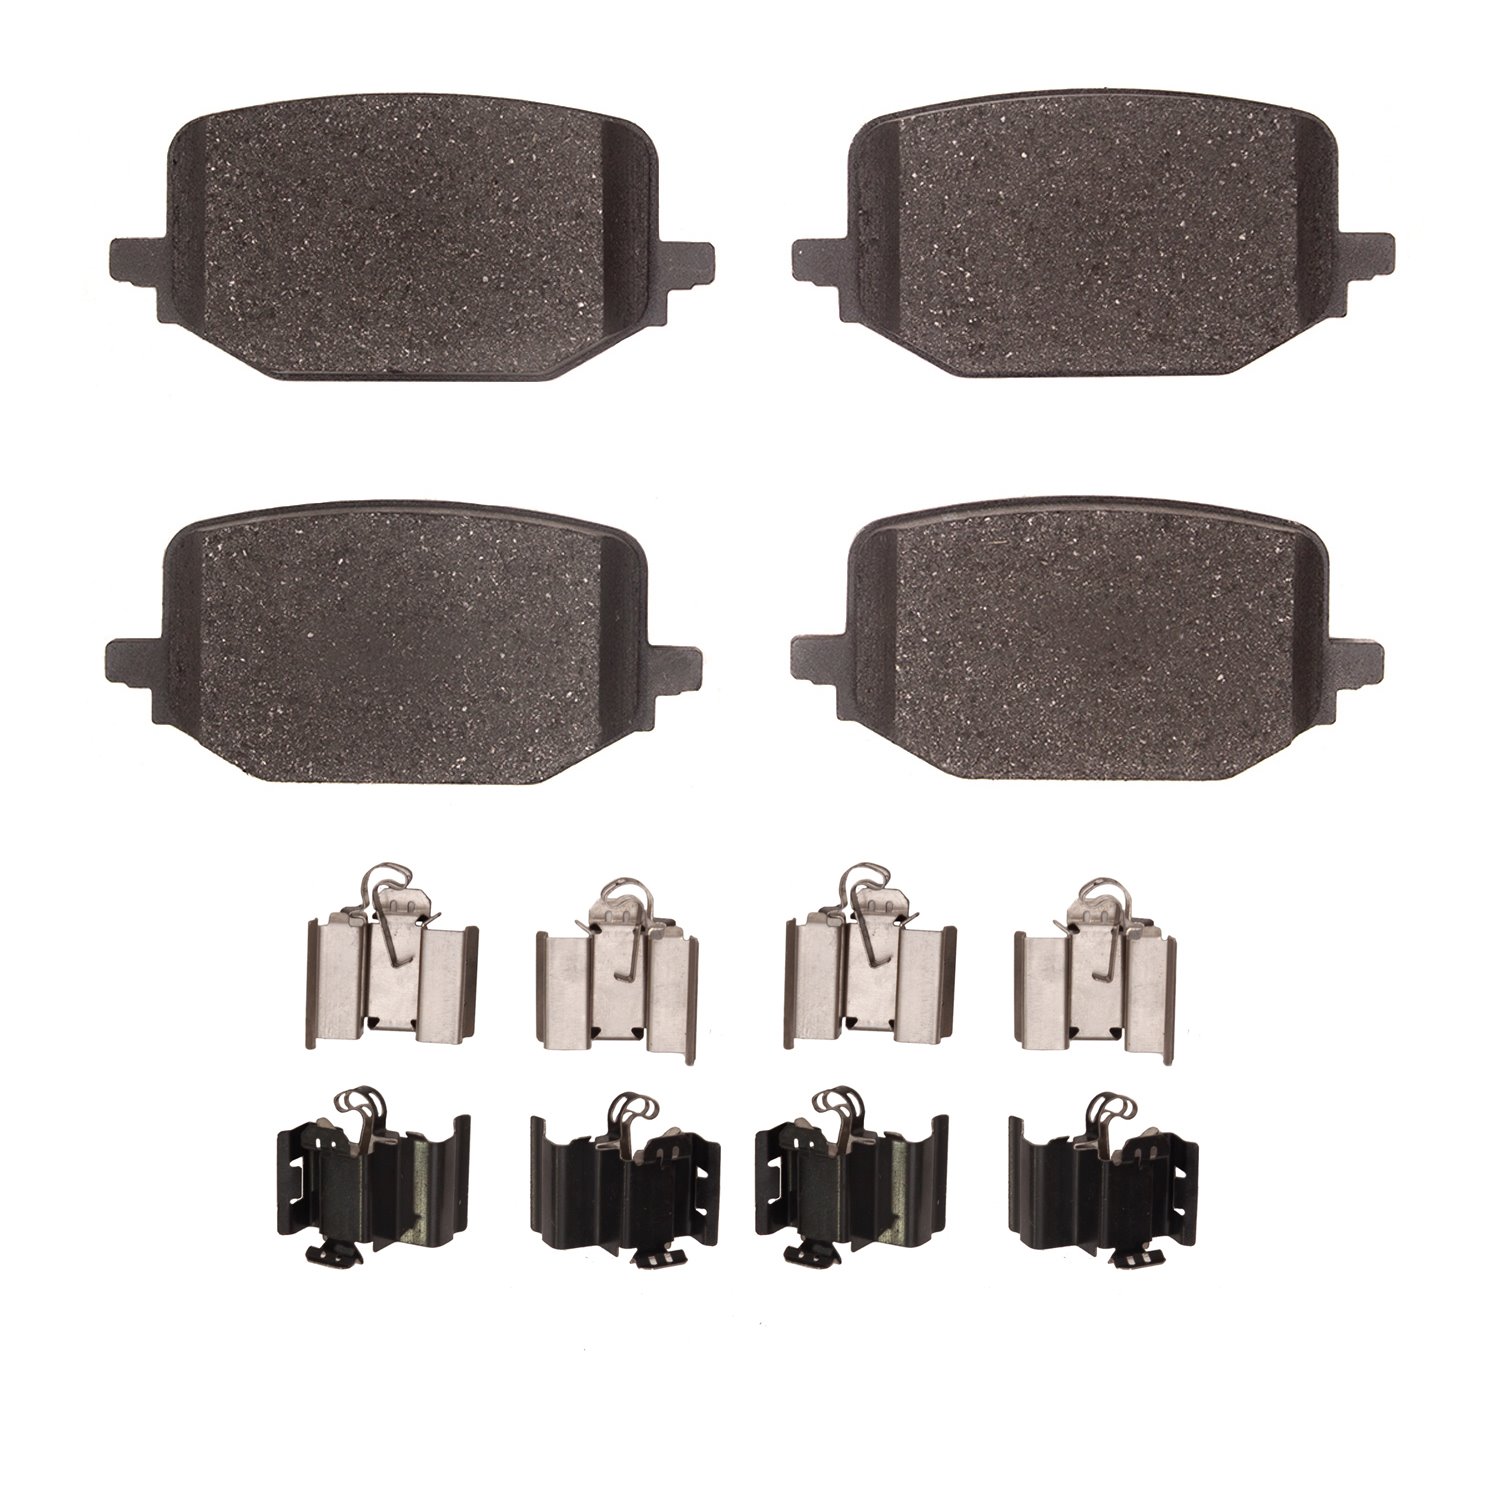 1310-2231-01 3000-Series Ceramic Brake Pads & Hardware Kit, Fits Select Ford/Lincoln/Mercury/Mazda, Position: Rear